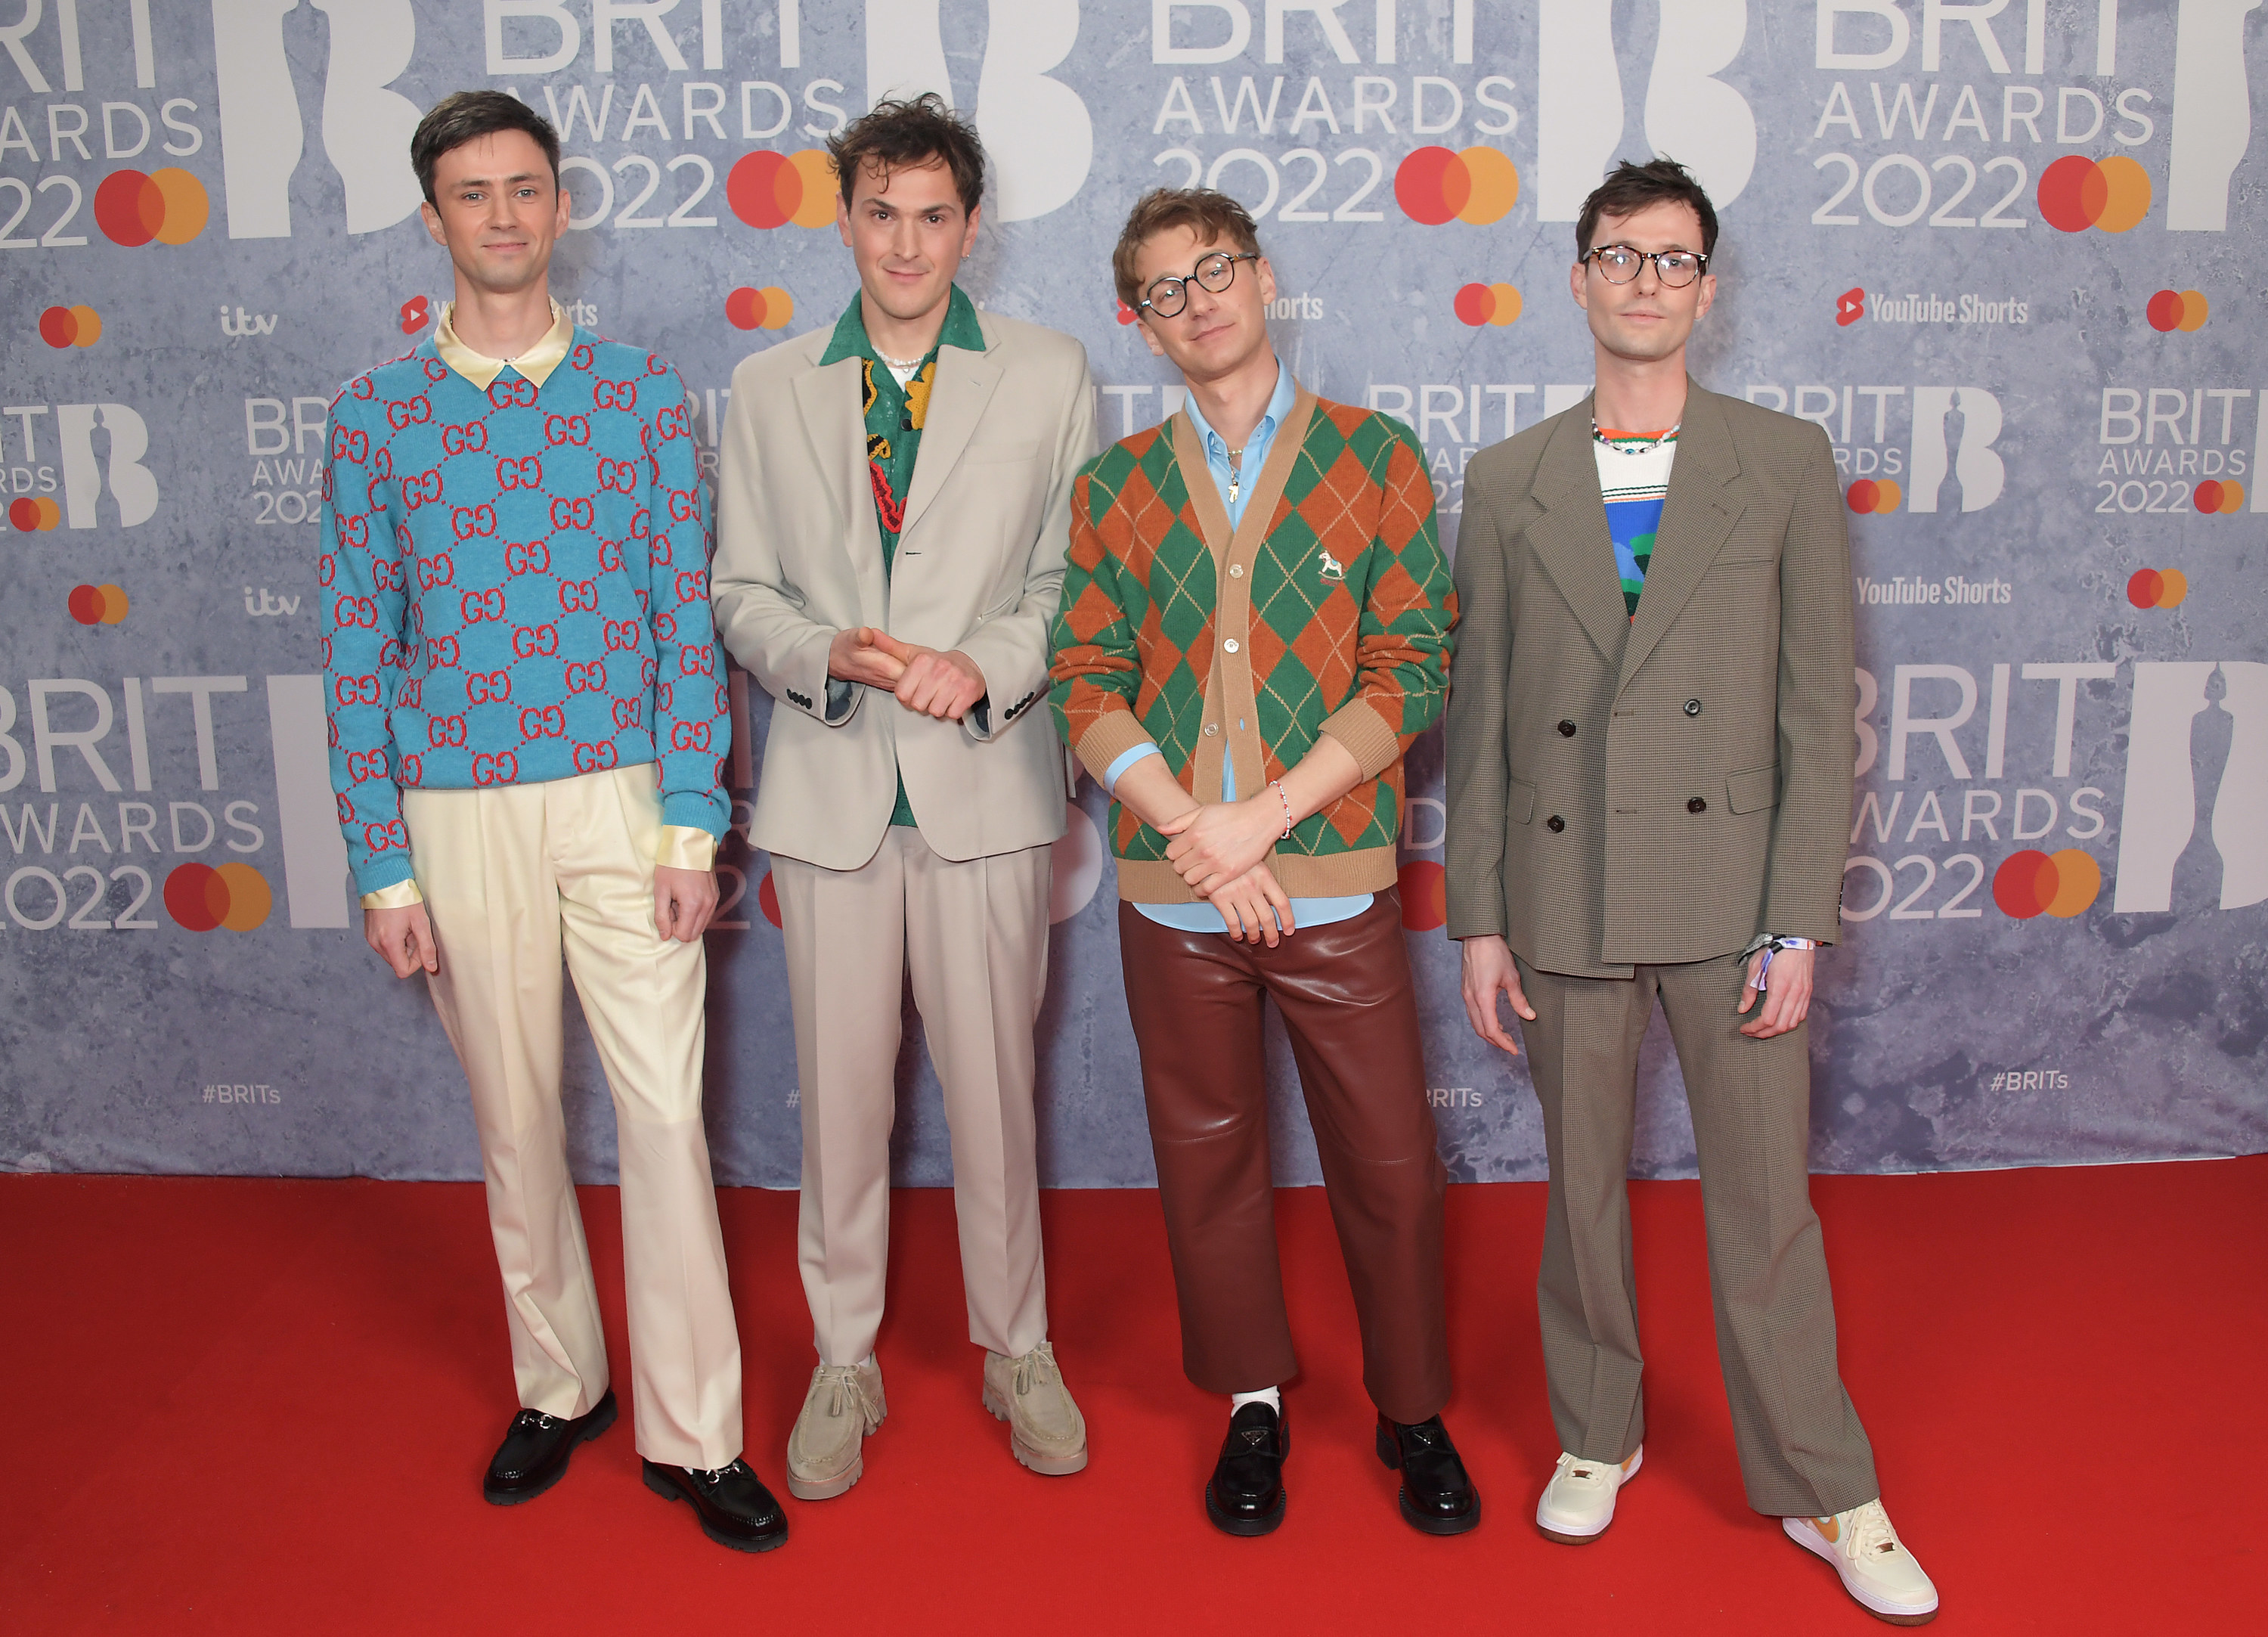 The band wears colorful sweaters and cardigans